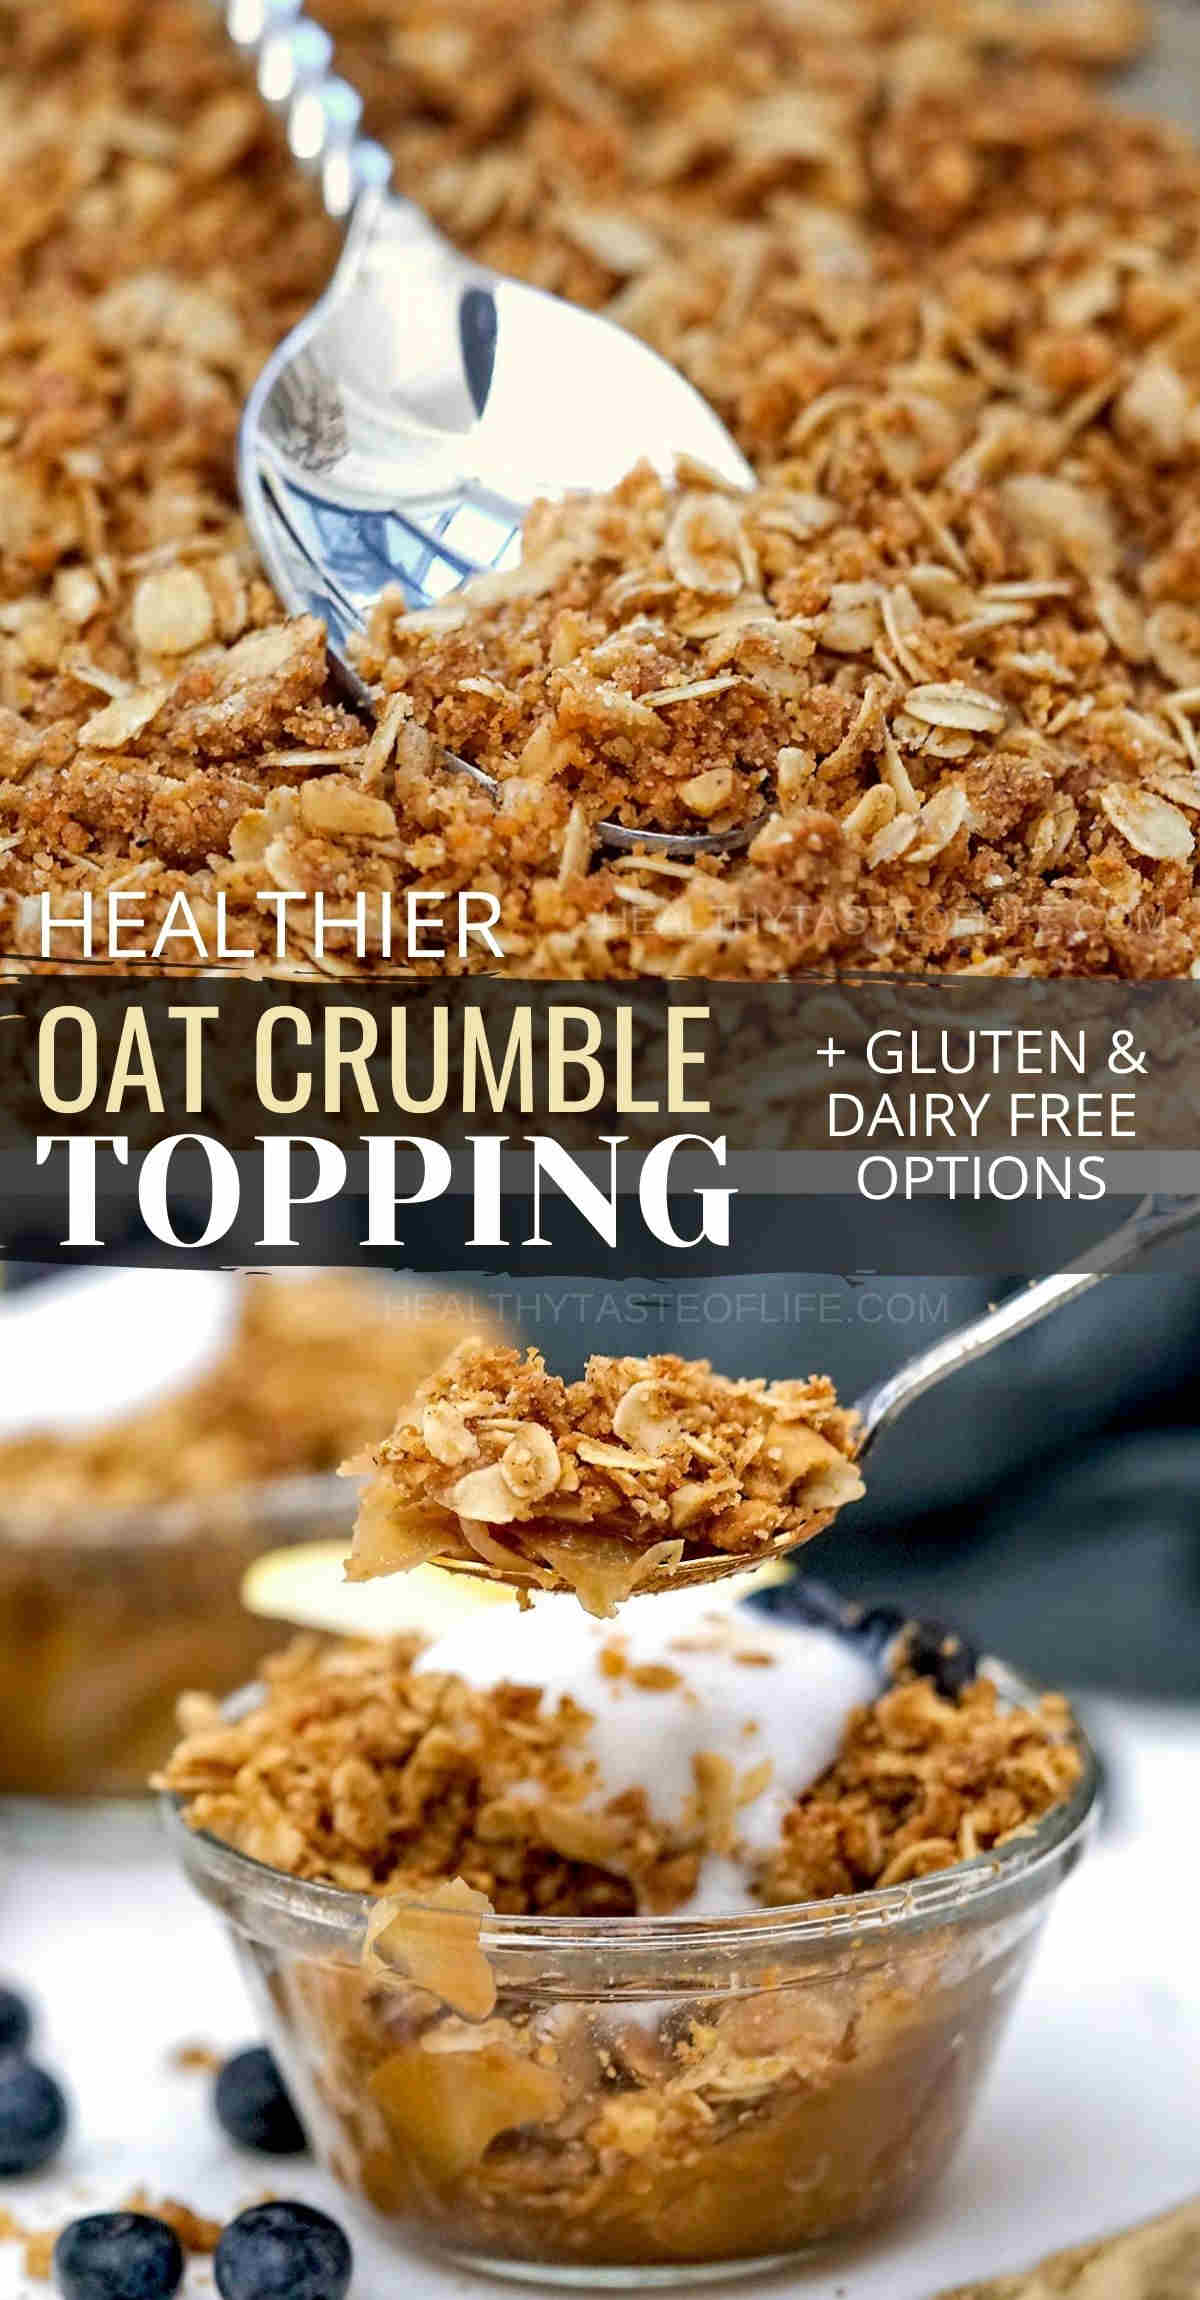 Crispy crunchy oat crumble topping that you can use for pies, muffins, coffee cakes or crisp. An oat crumble topping to go wild for – the crunchy, nutty, cinnamon-spiked crumble topping with oats is the perfect complement to any warm baked filling. You can also make this oat crumb topping healthier (gluten or dairy free) and serve separate in breakfast or as a snack. #crumbletopping #oatcrumbtopping #oatcrumbletopping #oatcrumble #oatmeal #streuseltopping #oatstreuseltopping